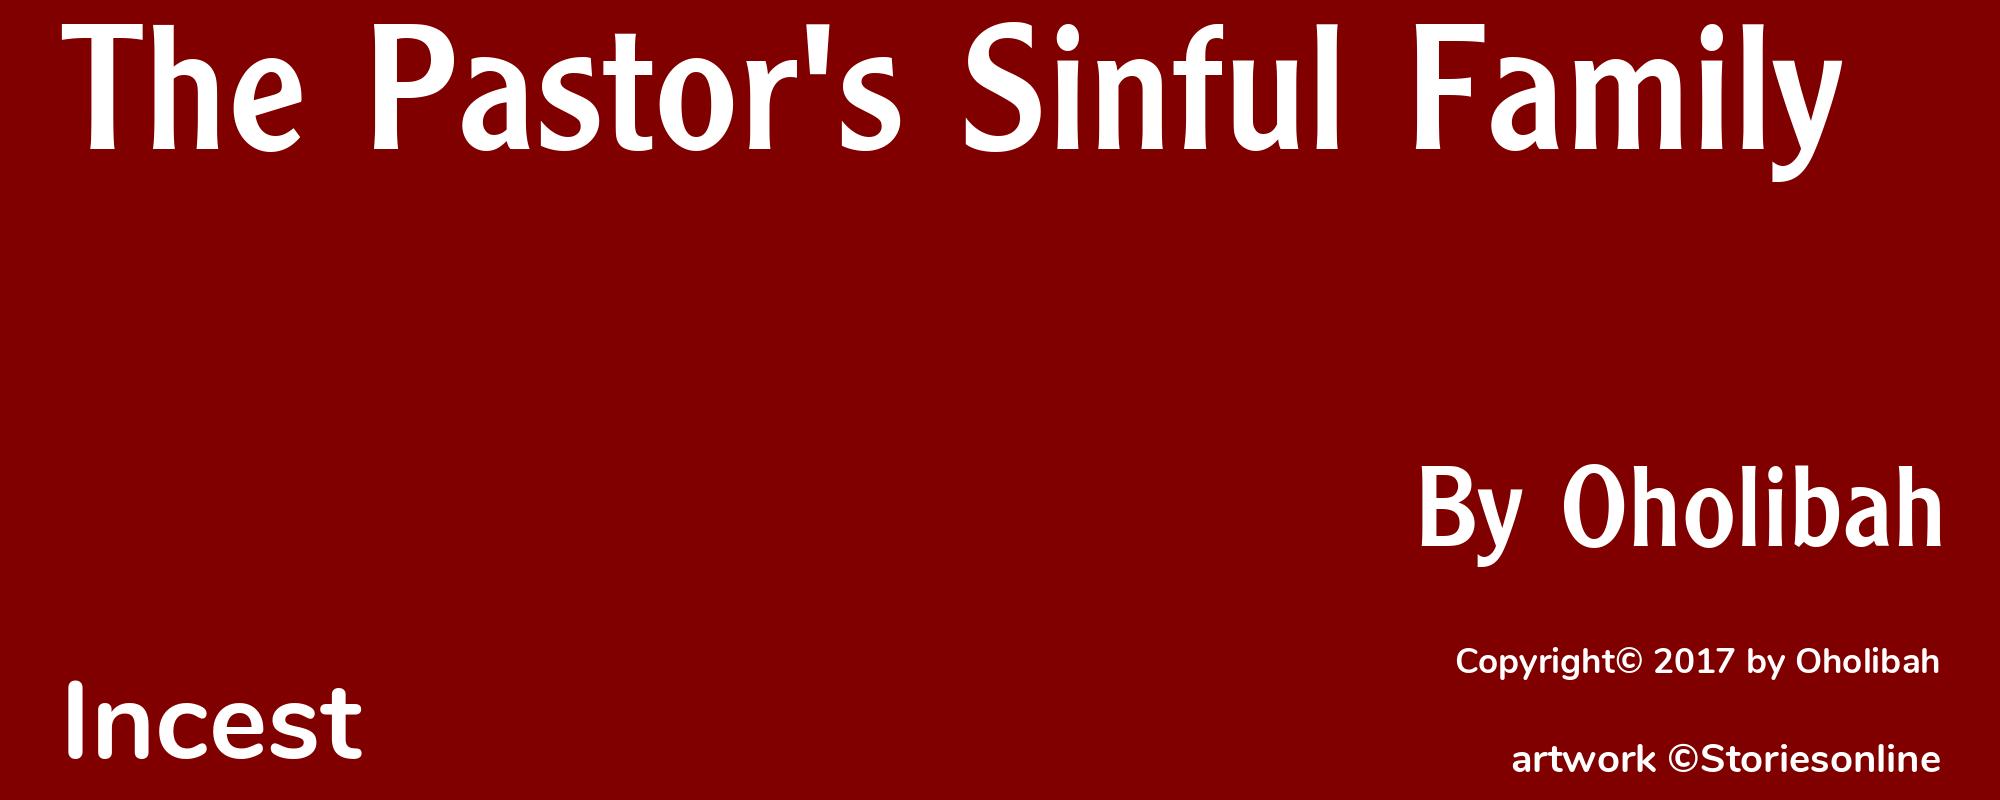 The Pastor's Sinful Family - Cover